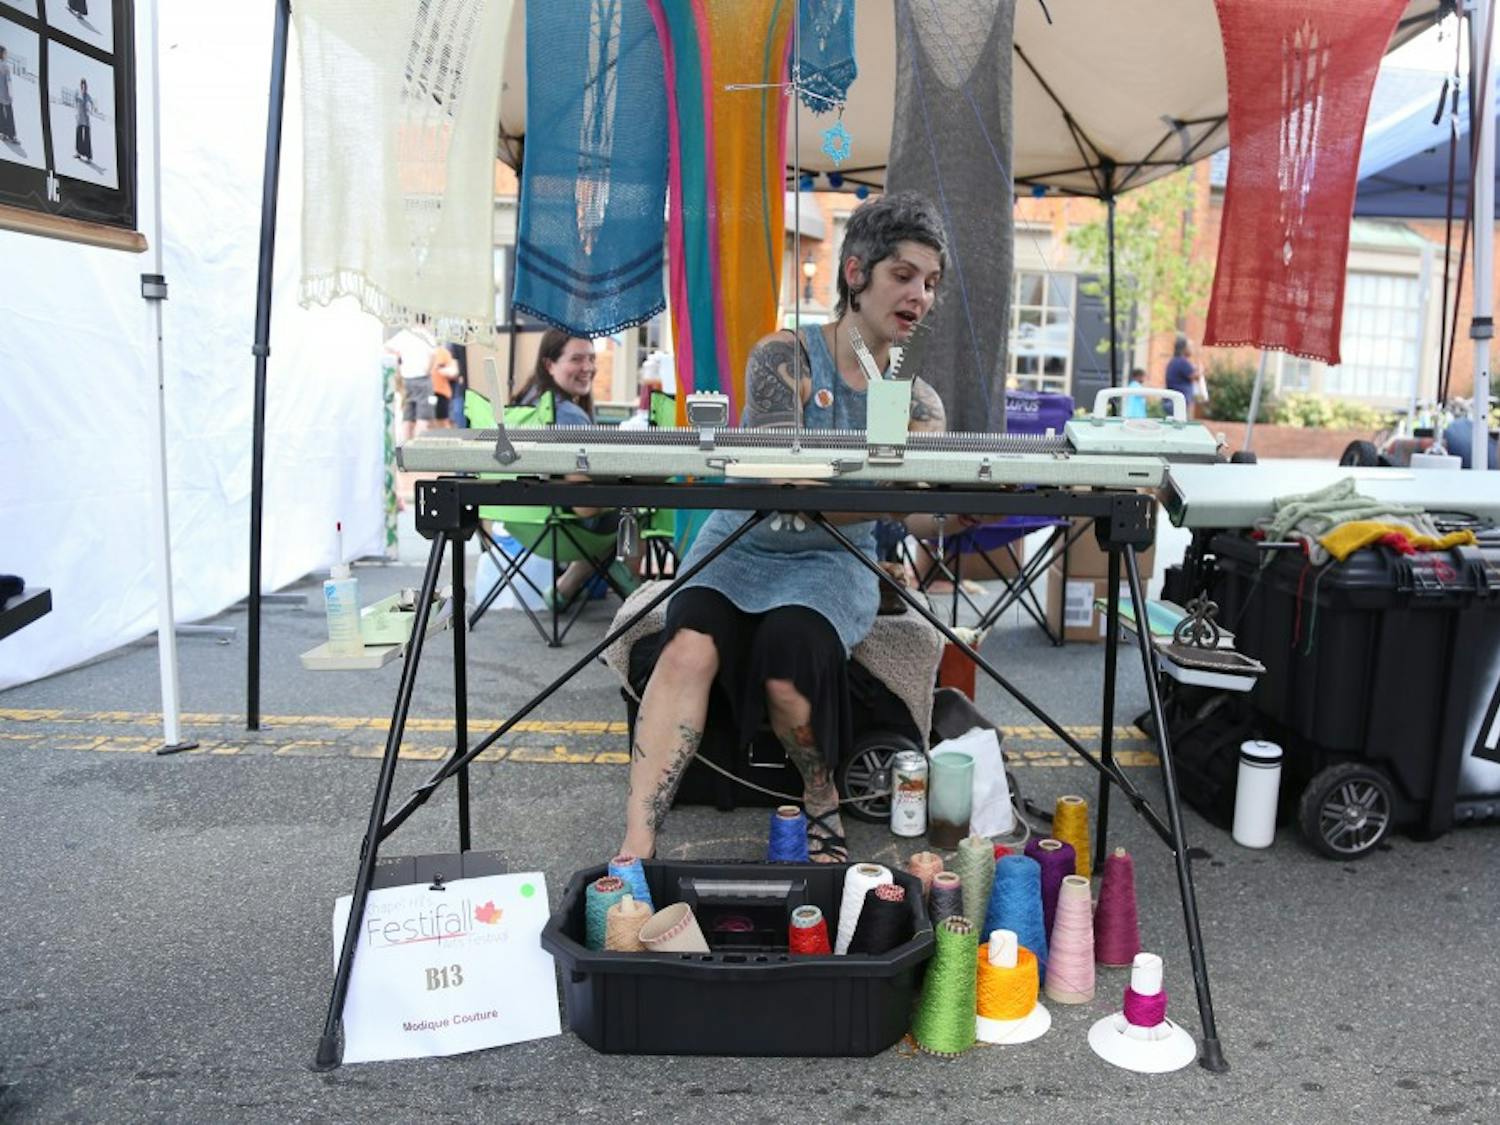 &nbsp;
Raleigh-based artist, Eris Swanstrom, knits on a knitting machine at her booth at Festifall, a Chapel Hill festival &nbsp;&nbsp;showcasing local artists. The celebration of art is held annually in Downtown Chapel Hill, this year falling on Sunday. Swanstrom knits on her vintage, special-edition knitting machine as shoppers peruse her racks of skirts, shirts, mittens and other knitted wool garments. Modique Couture, Swanstrom’s business, features one-of-a-kind wearable pieces of art. She began knitting 30 years ago, during the process, she discovered knitting machines. Now, Swanstrom sells her work online and at festivals.